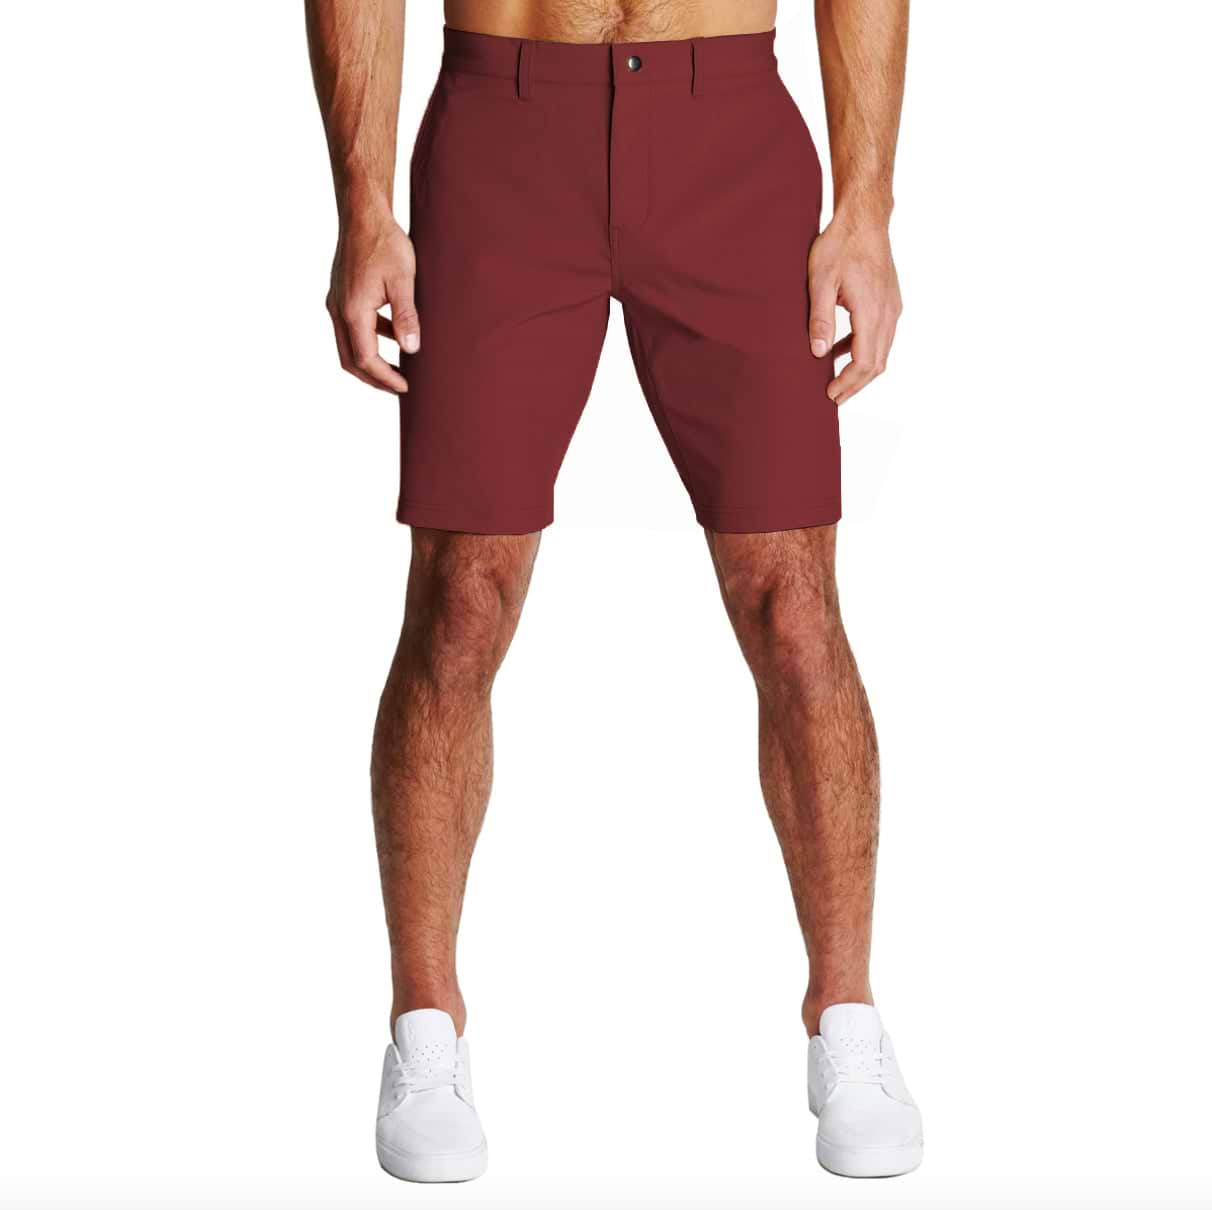 Athletic Fit Shorts - Maroon